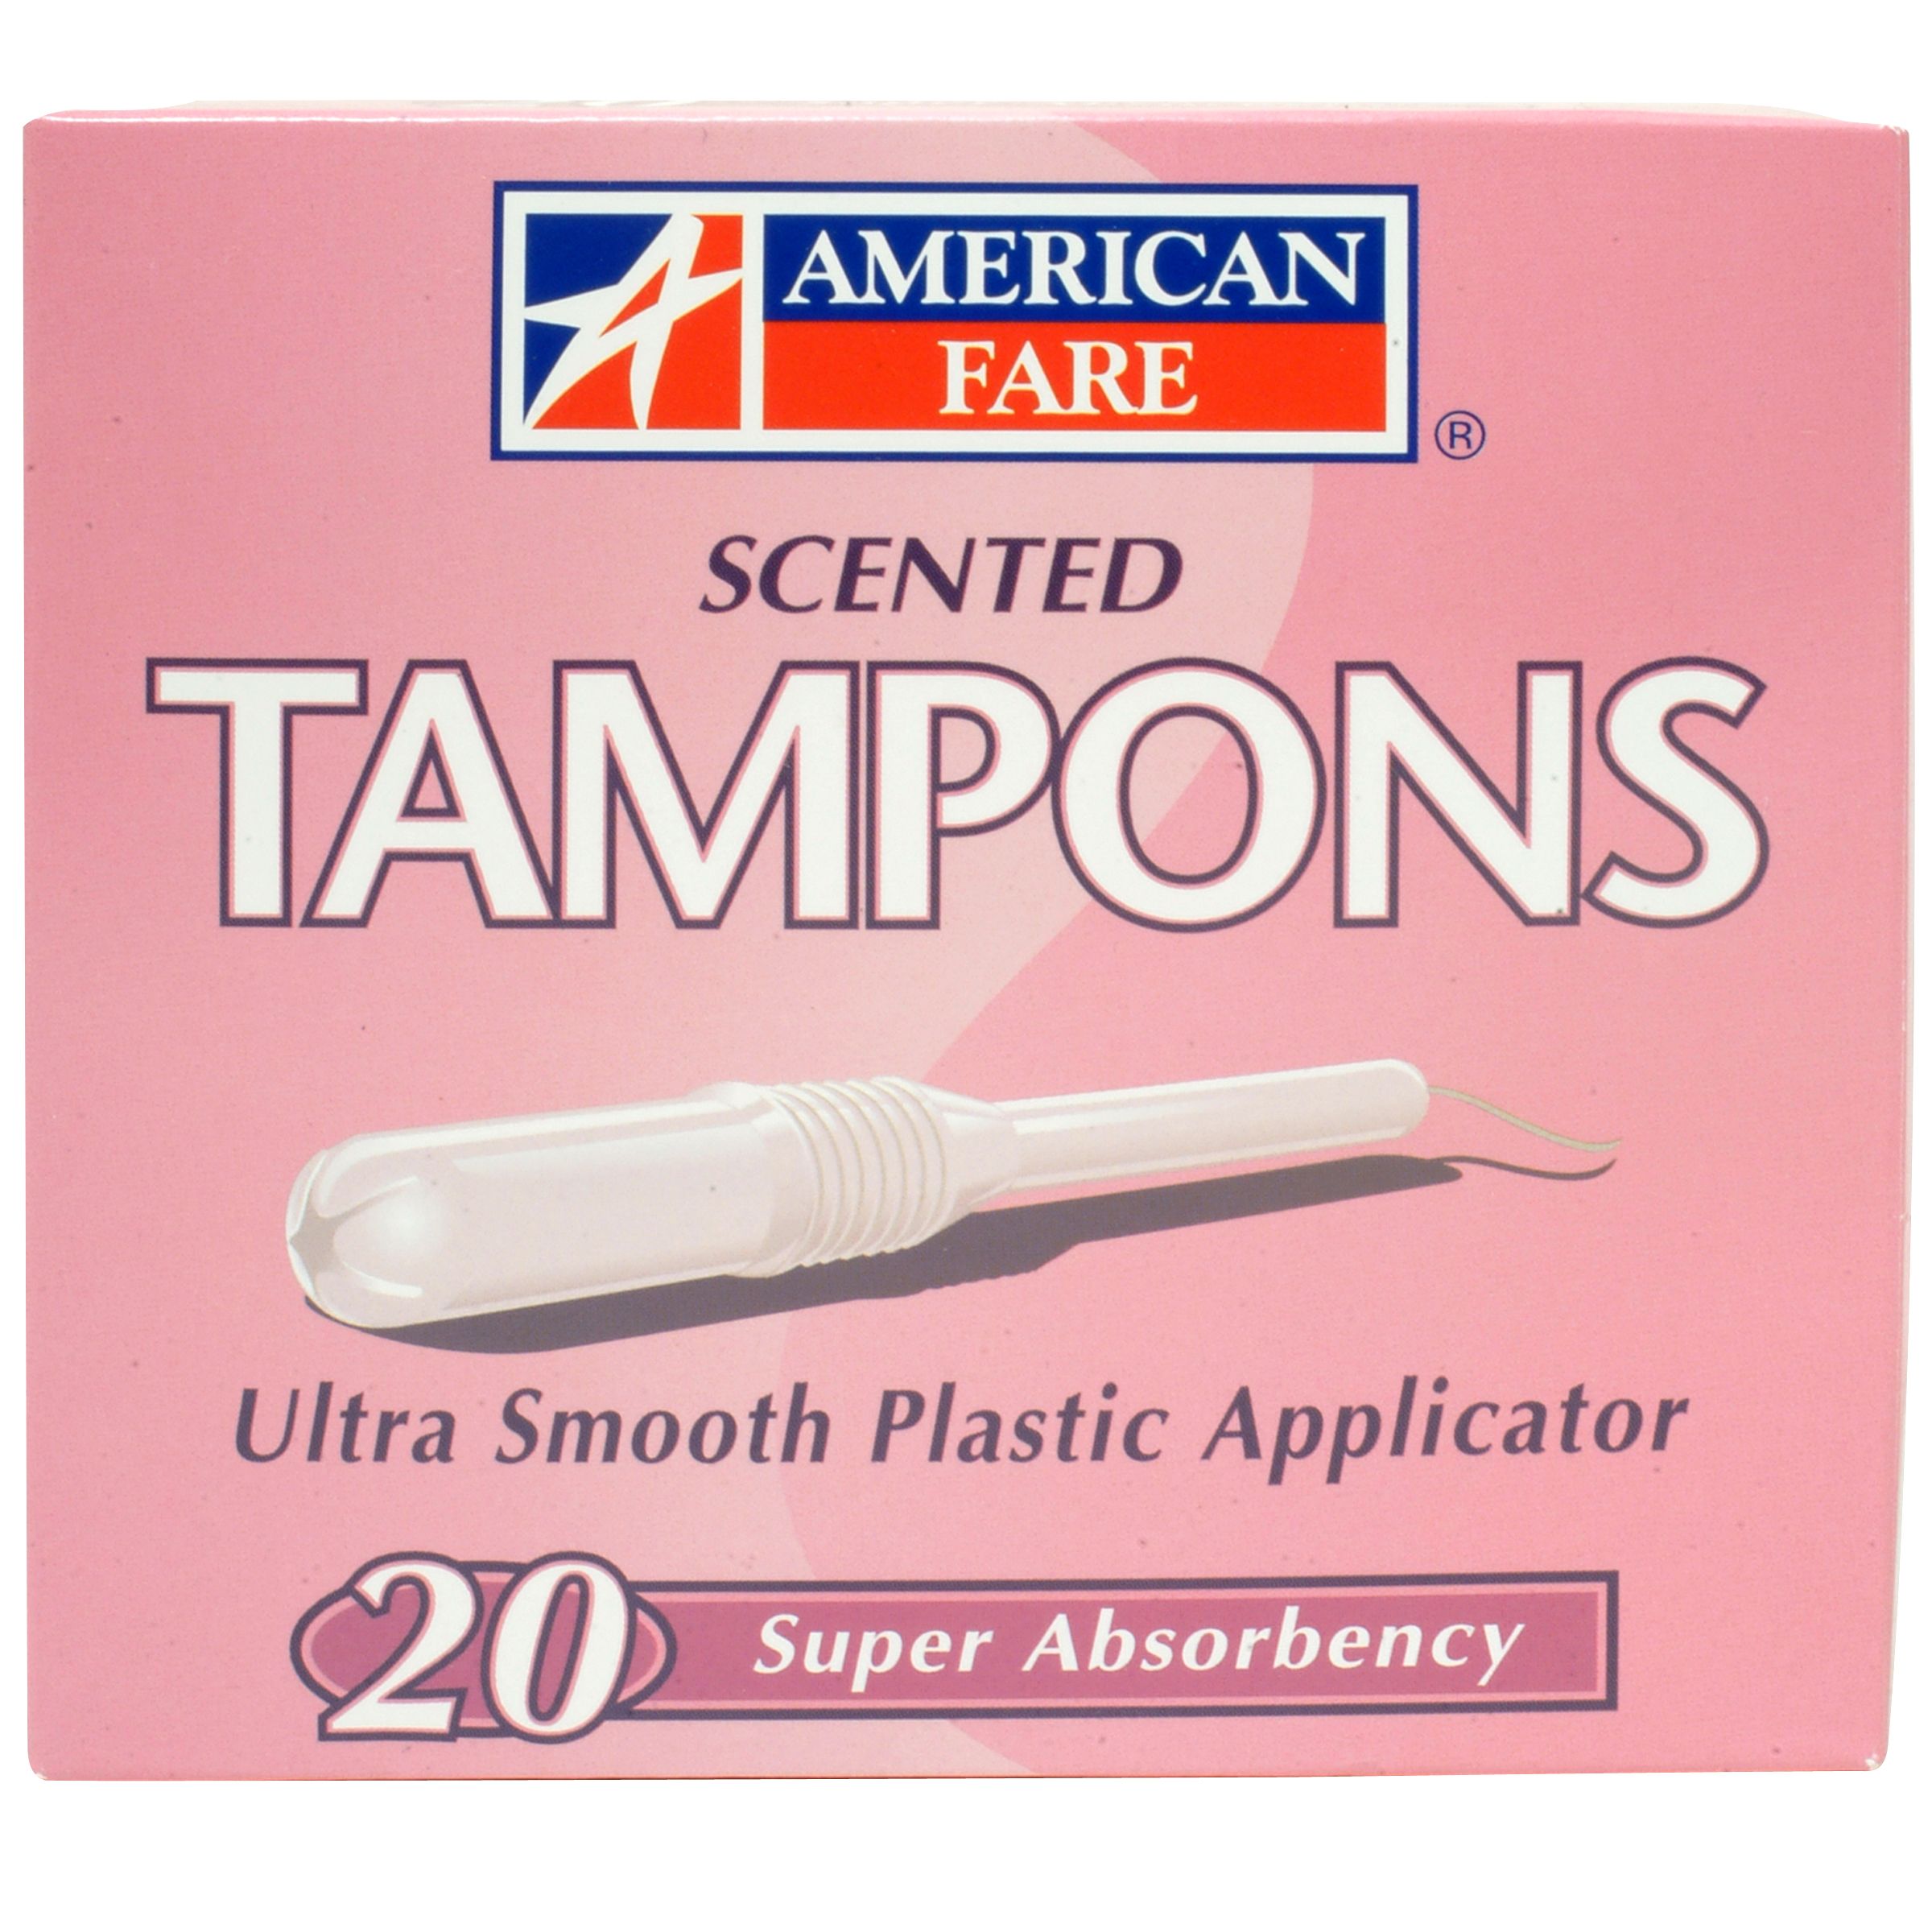 Tampons Scented - 20 count